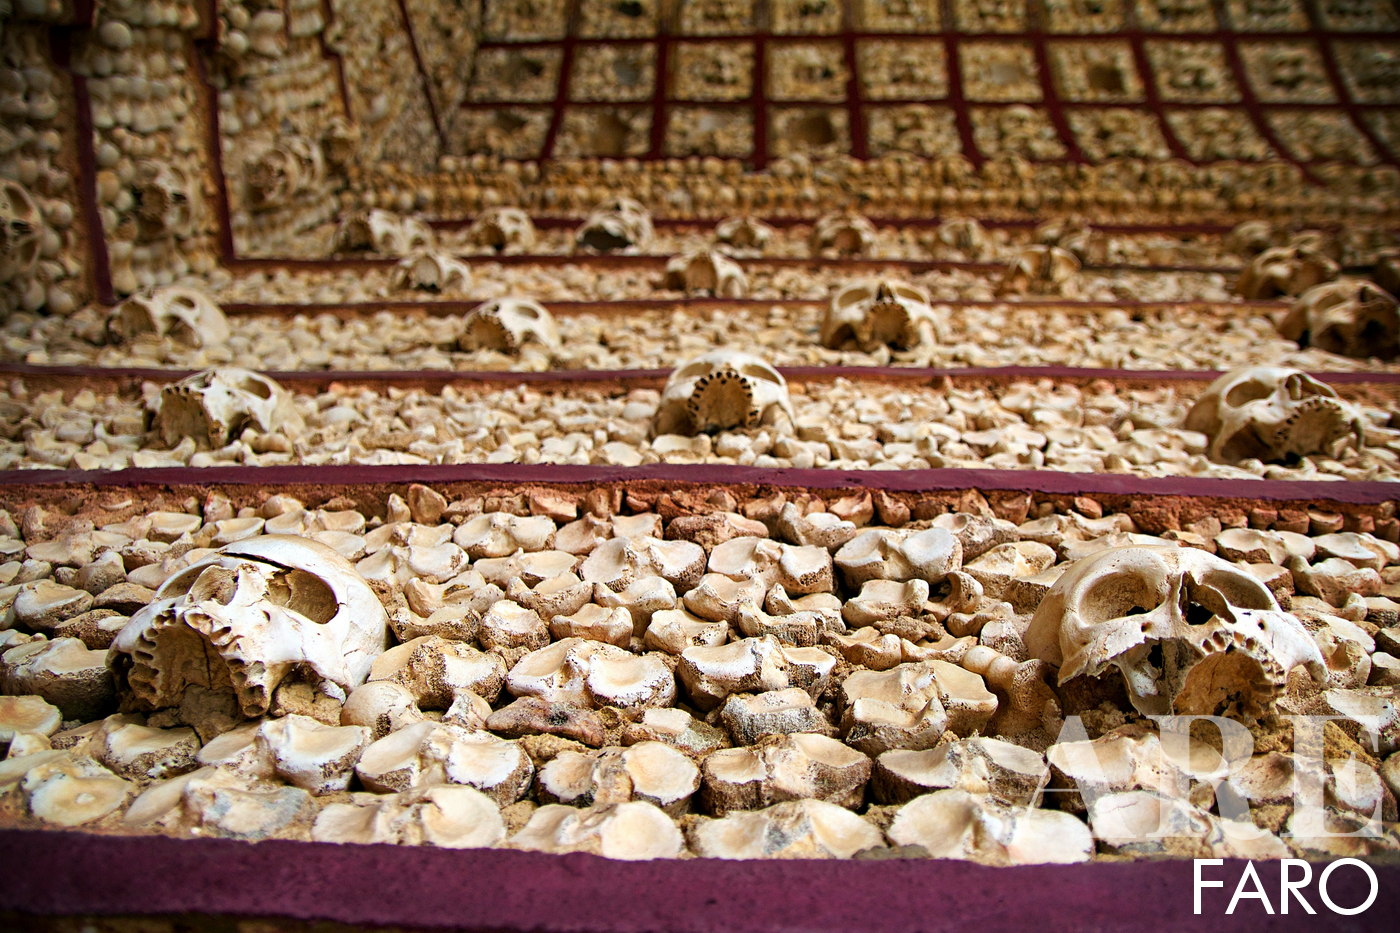 <strong>Chapel of Bones in Faro</strong> - is one of several bone chapels that exist in Portugal. The walls and ceiling are decorated with the bones and skulls of hundreds of monks. According to records, the purpose of this macabre decoration is to show the mortality and ephemerality of human life. When we enter, we can observe the bones arranged symmetrically and artistically, creating a strange and fascinating environment. Other bone chapels can be found throughout Europe, with the Chapel of Bones in Évora, Portugal being one of the most well-known. If you want to visit, the Chapel of Bones is located inside the Carmo Church in Faro, a beautiful baroque church.